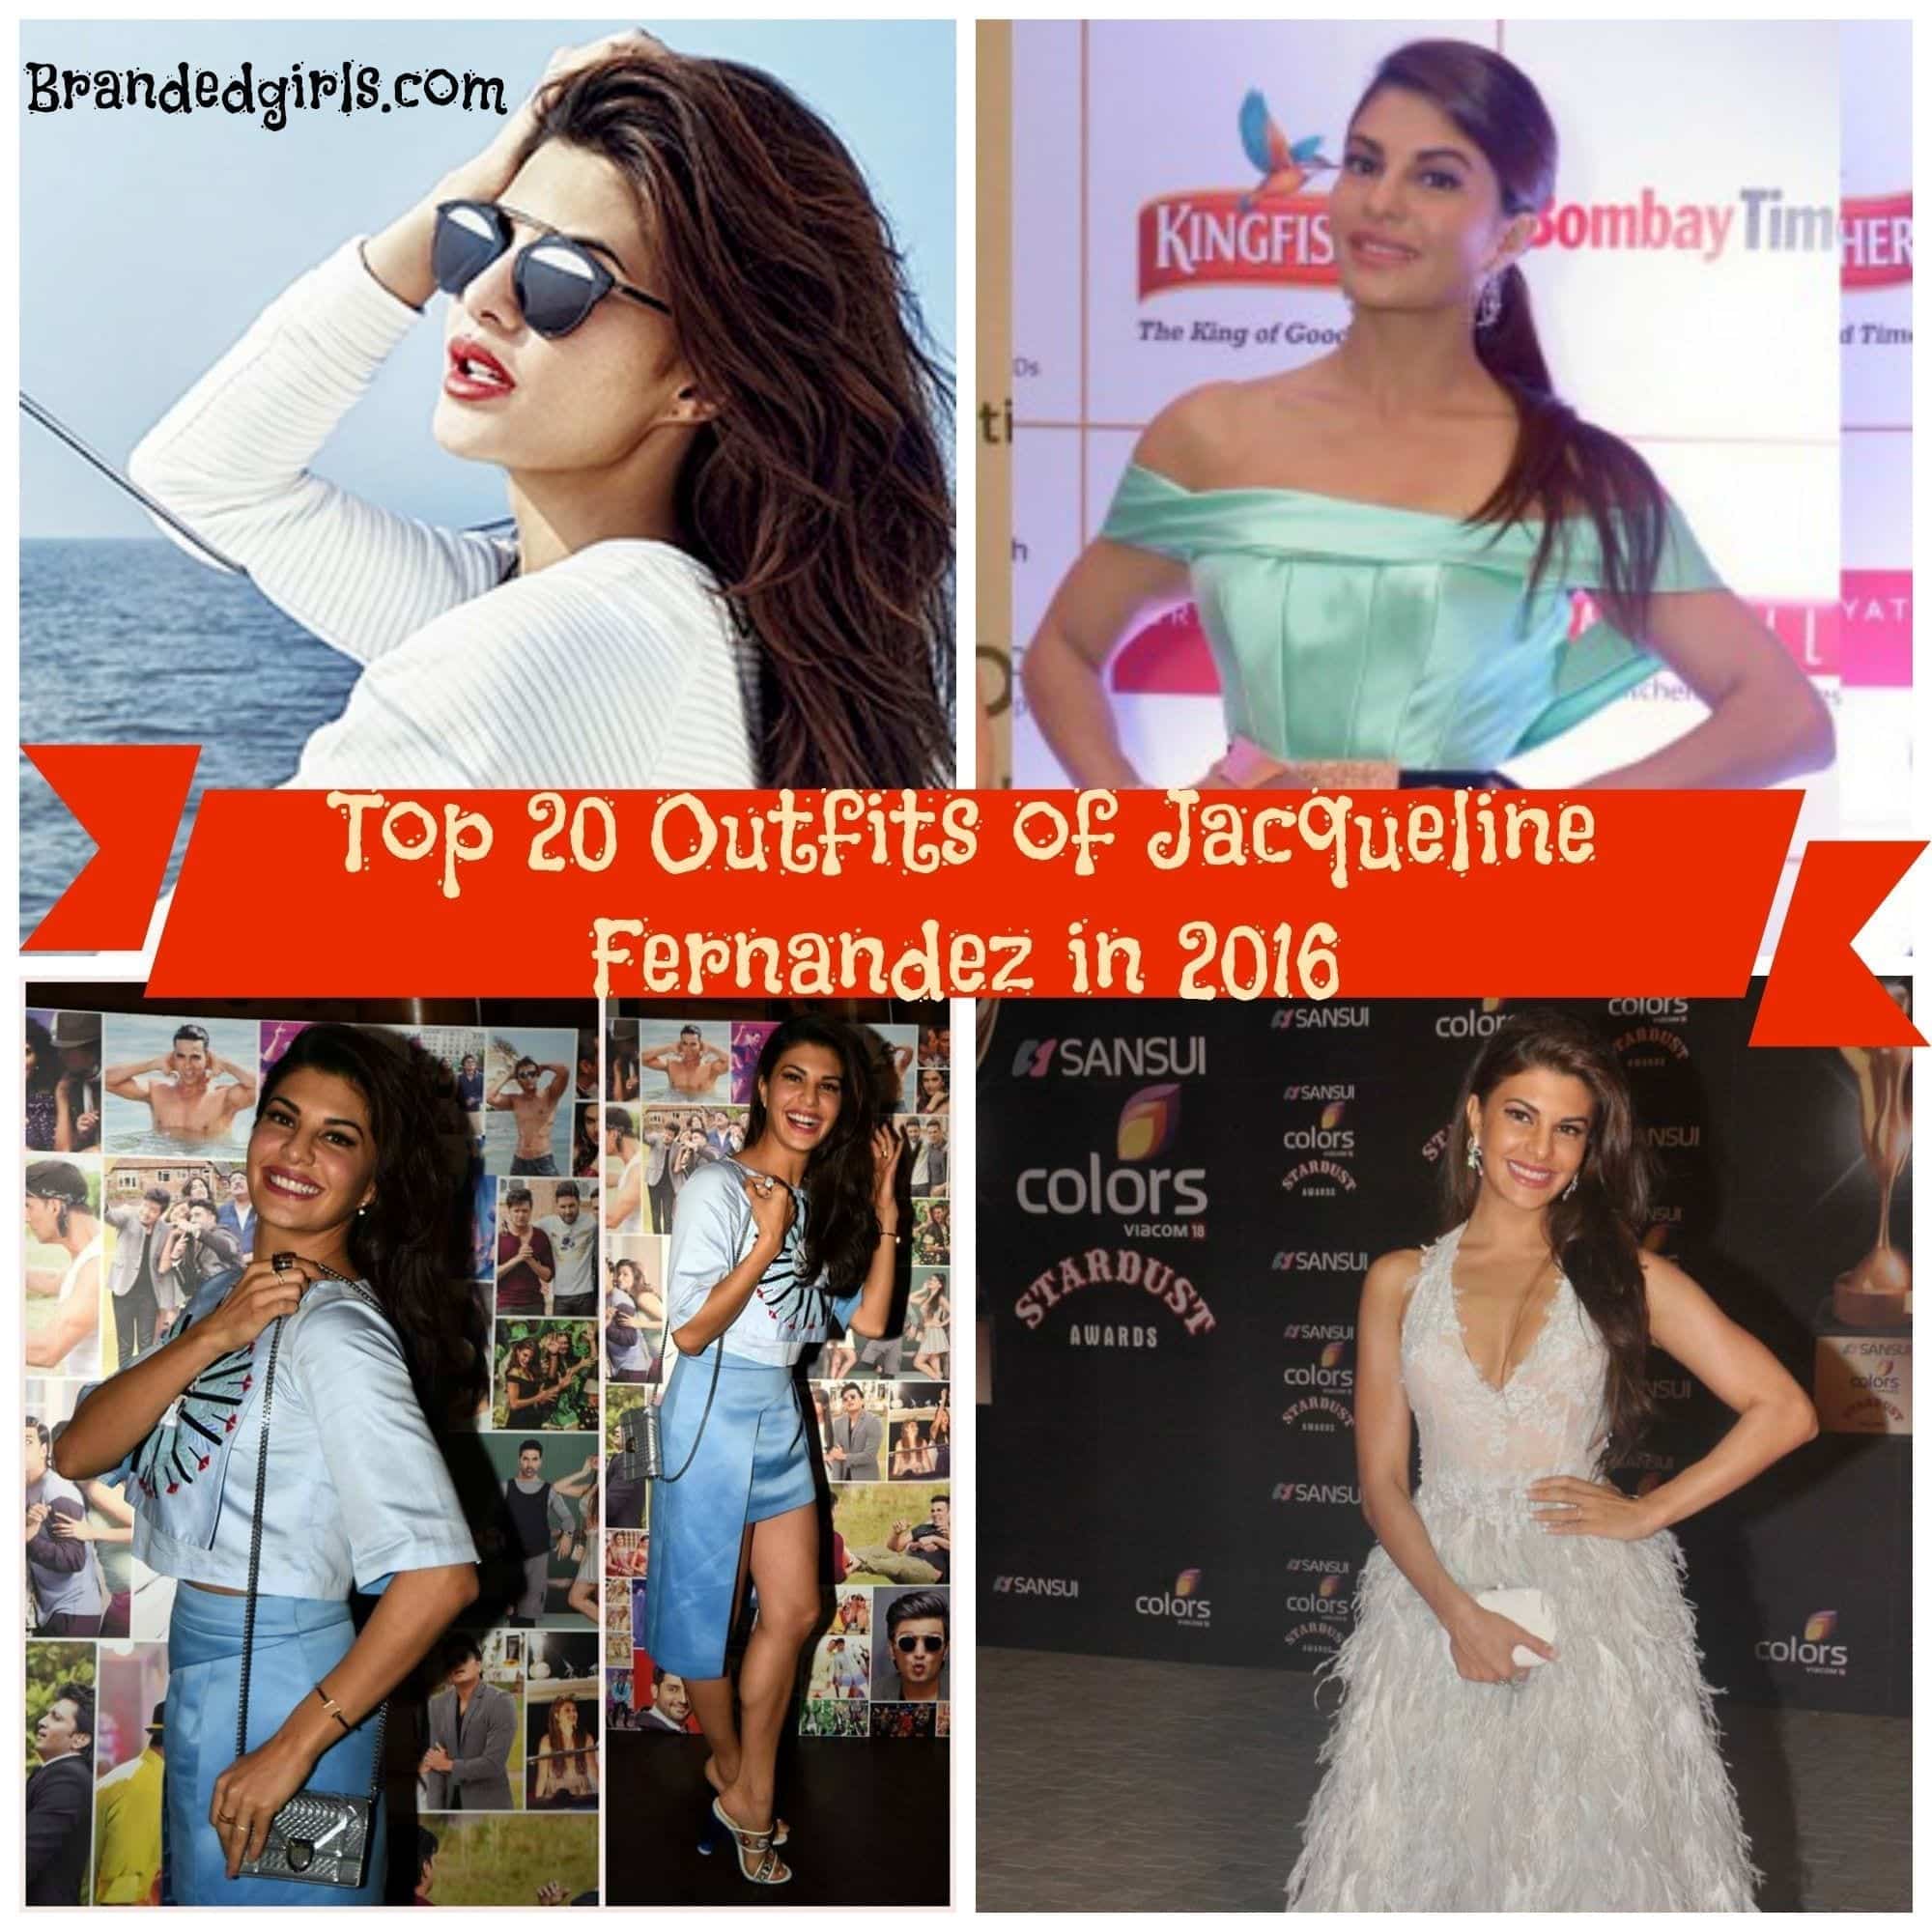 Jacqueline Fernandez Outfits-Top 20 Dressing Styles of Jacqueline This Year